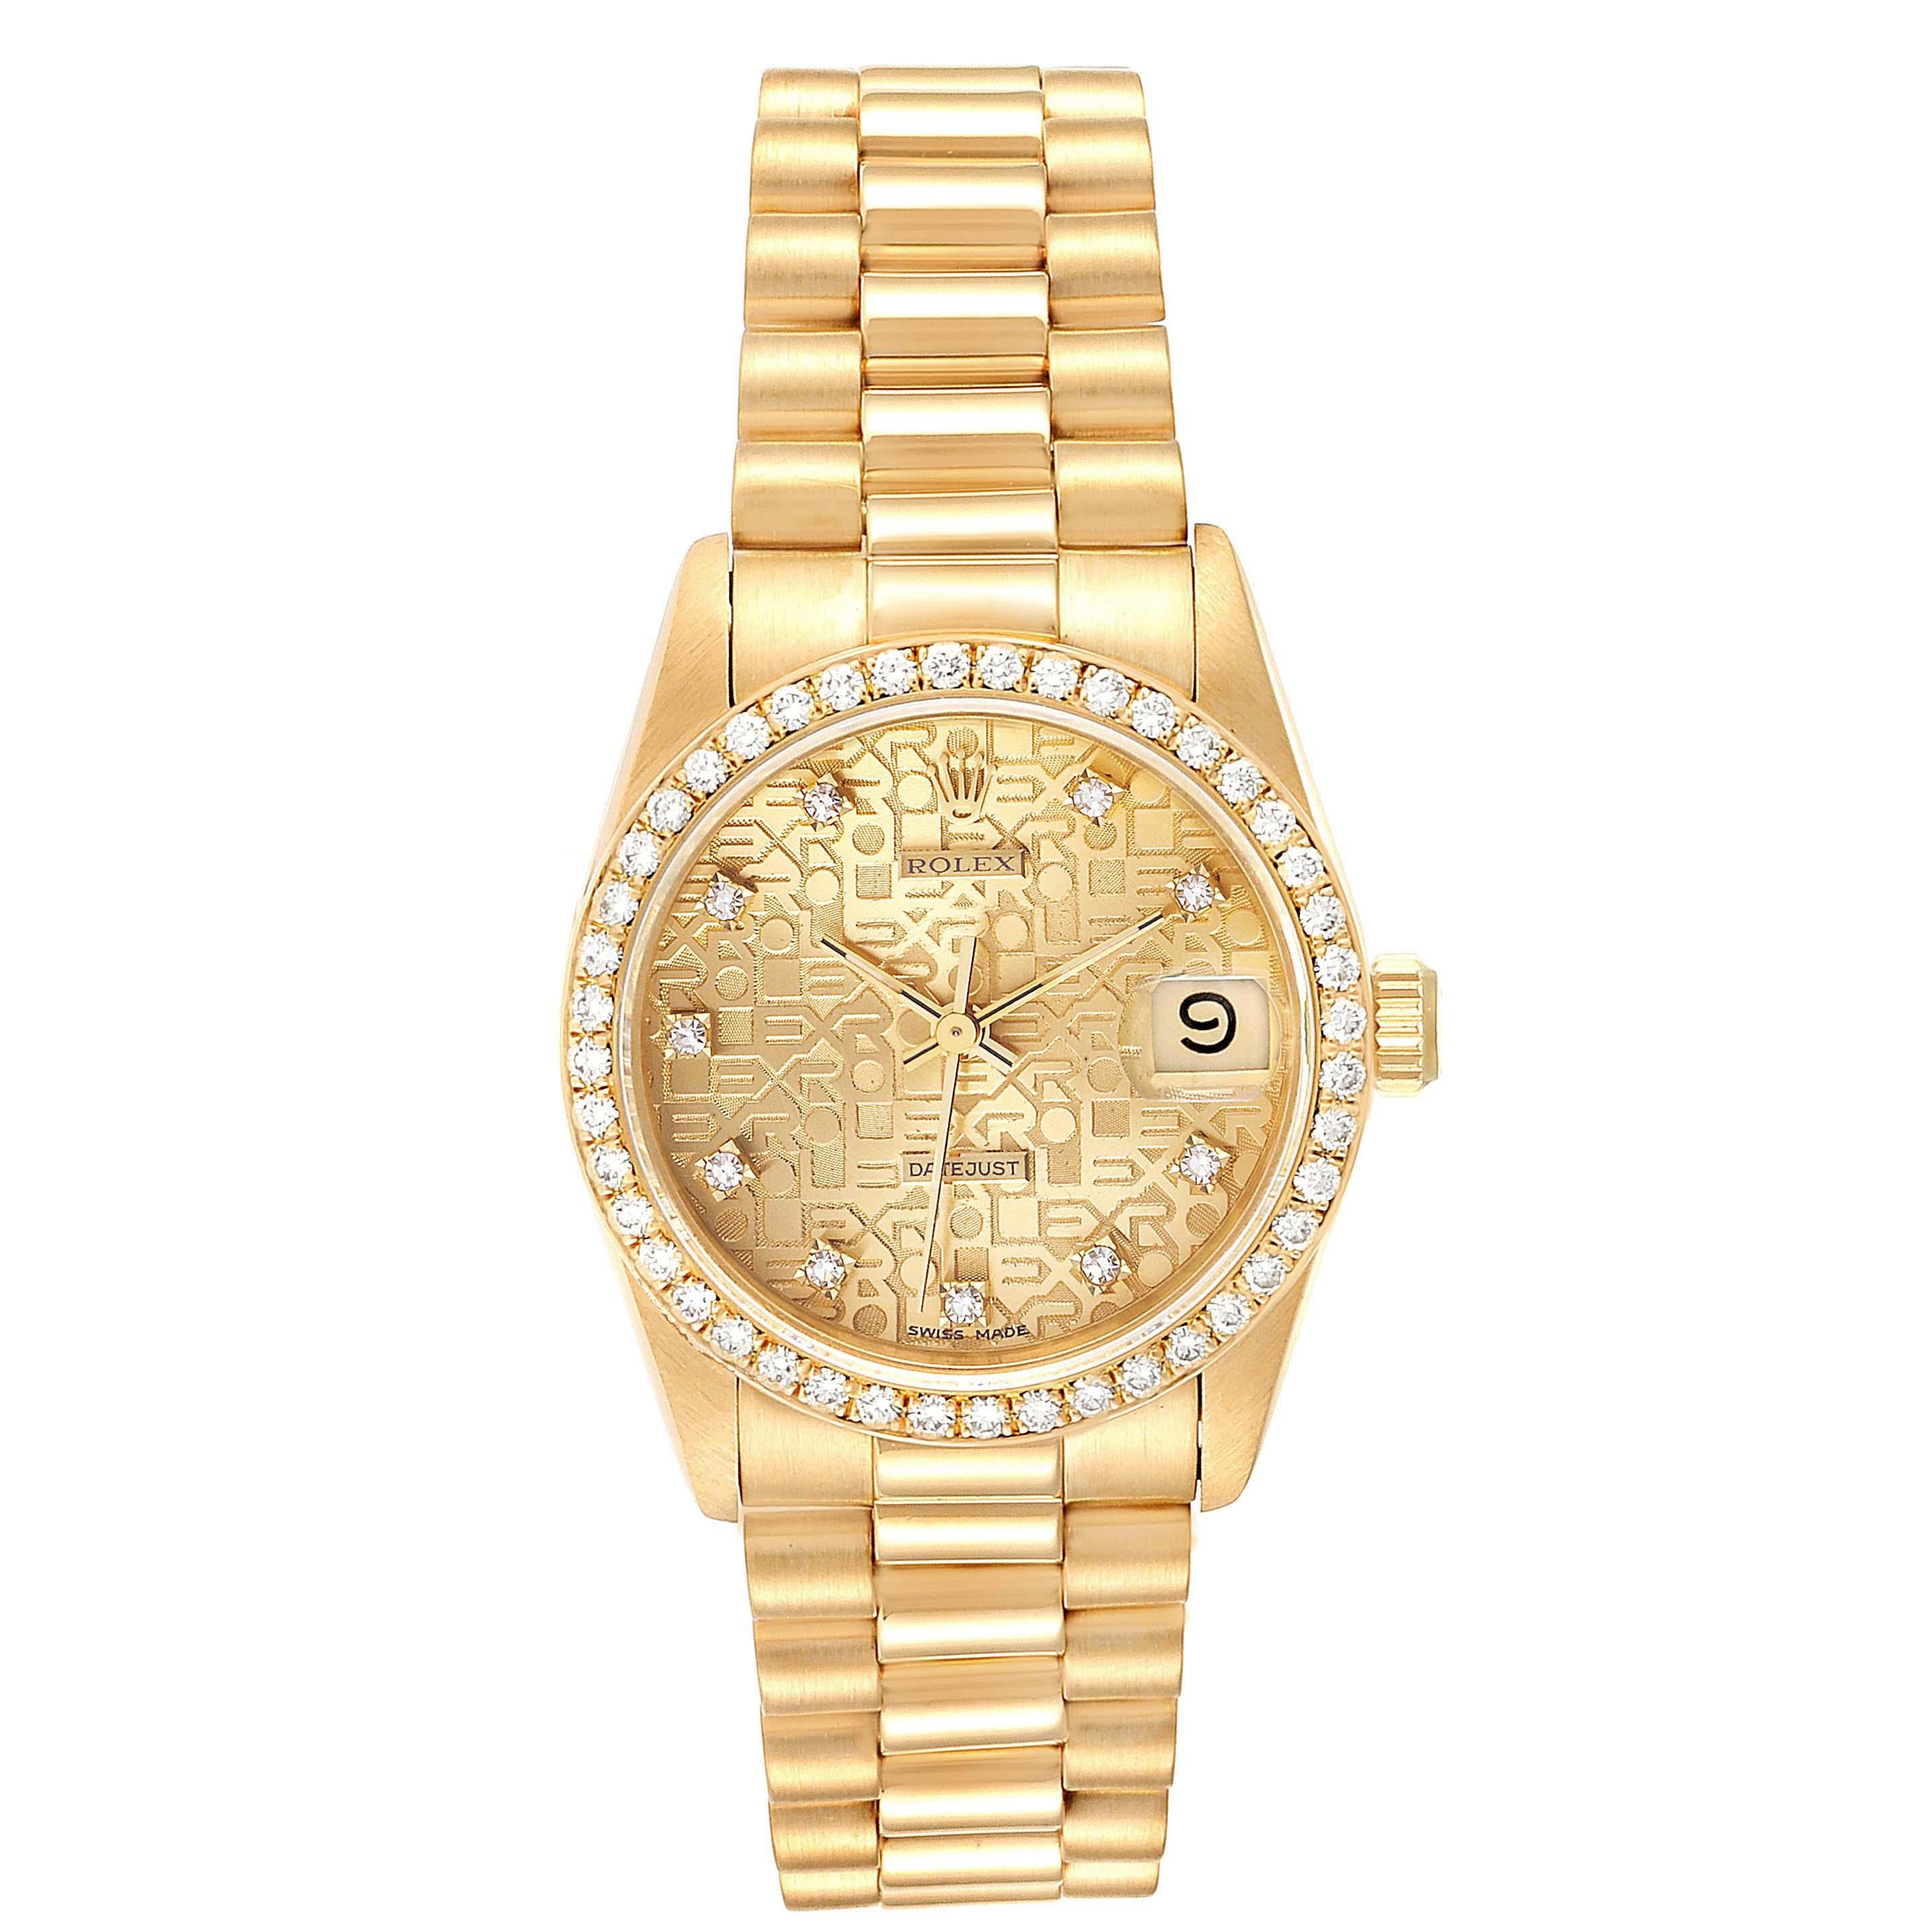 Rolex President Datejust 31 Midsize Yellow Gold Diamond Ladies Watch 68288. Officially certified chronometer self-winding movement. 18k yellow gold oyster case 31.0 mm in diameter. Rolex logo on a crown. 18k yellow gold fluted bezel. Scratch